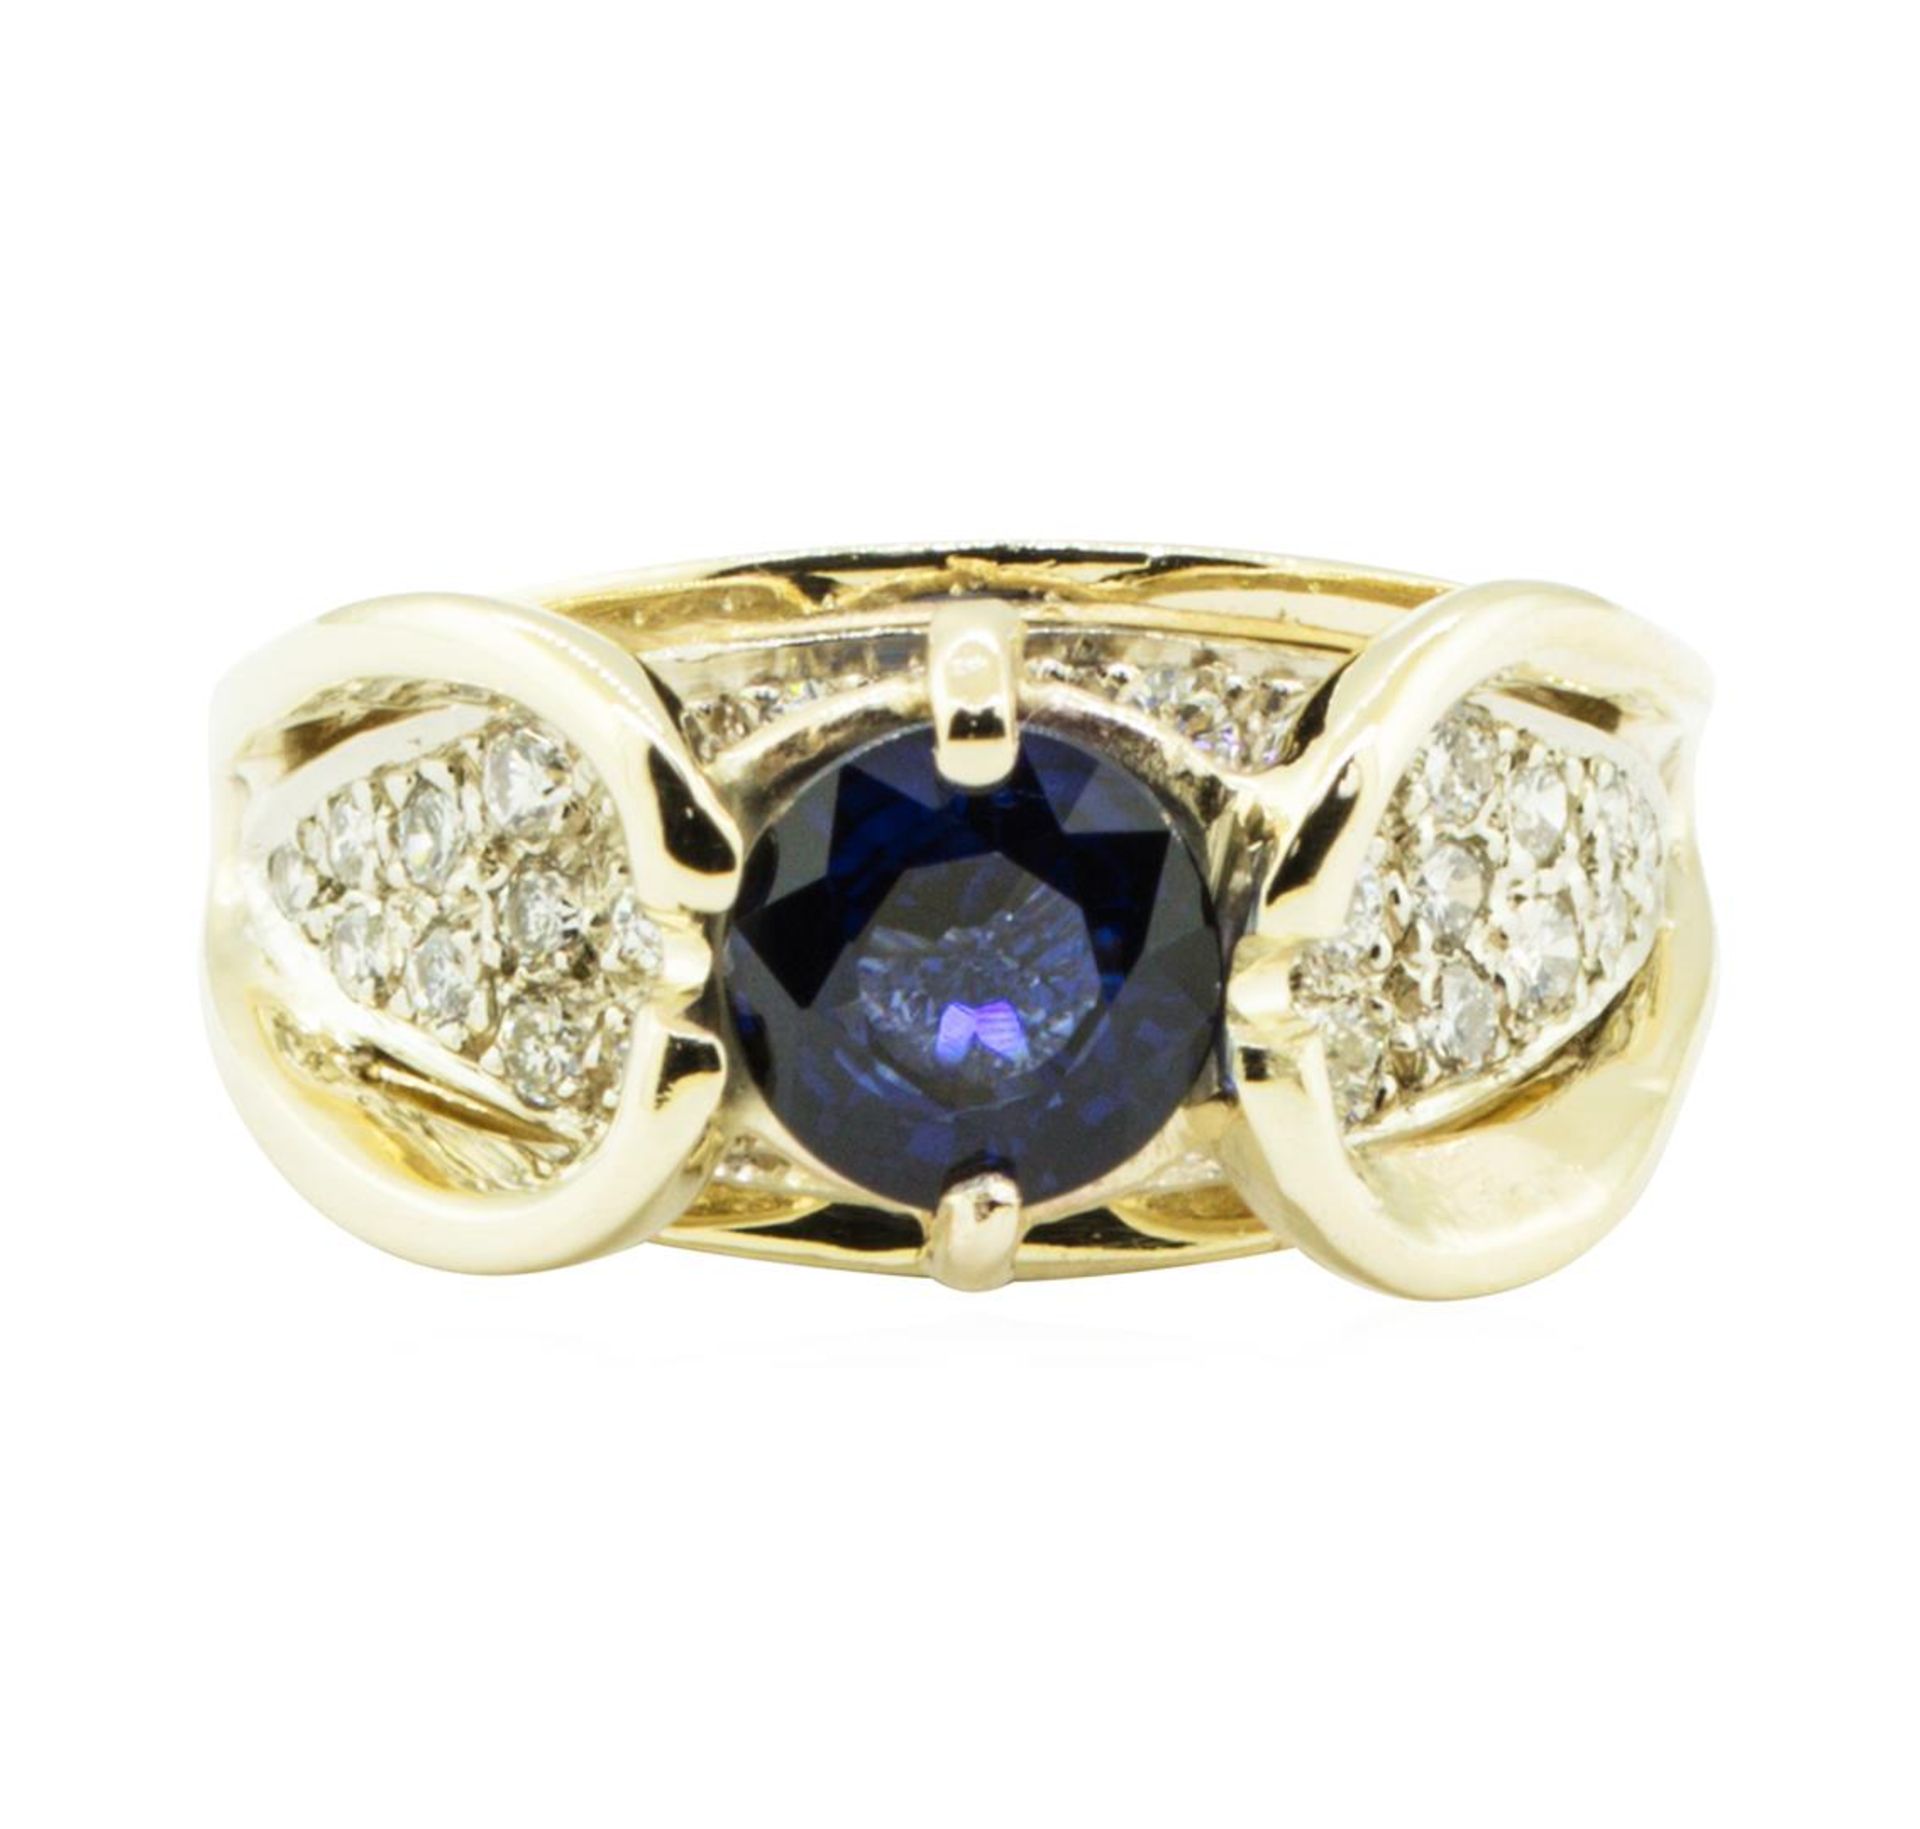 2.24 ctw Round Brilliant Blue Sapphire And Diamond Ring - 14KT Yellow And White - Image 2 of 5